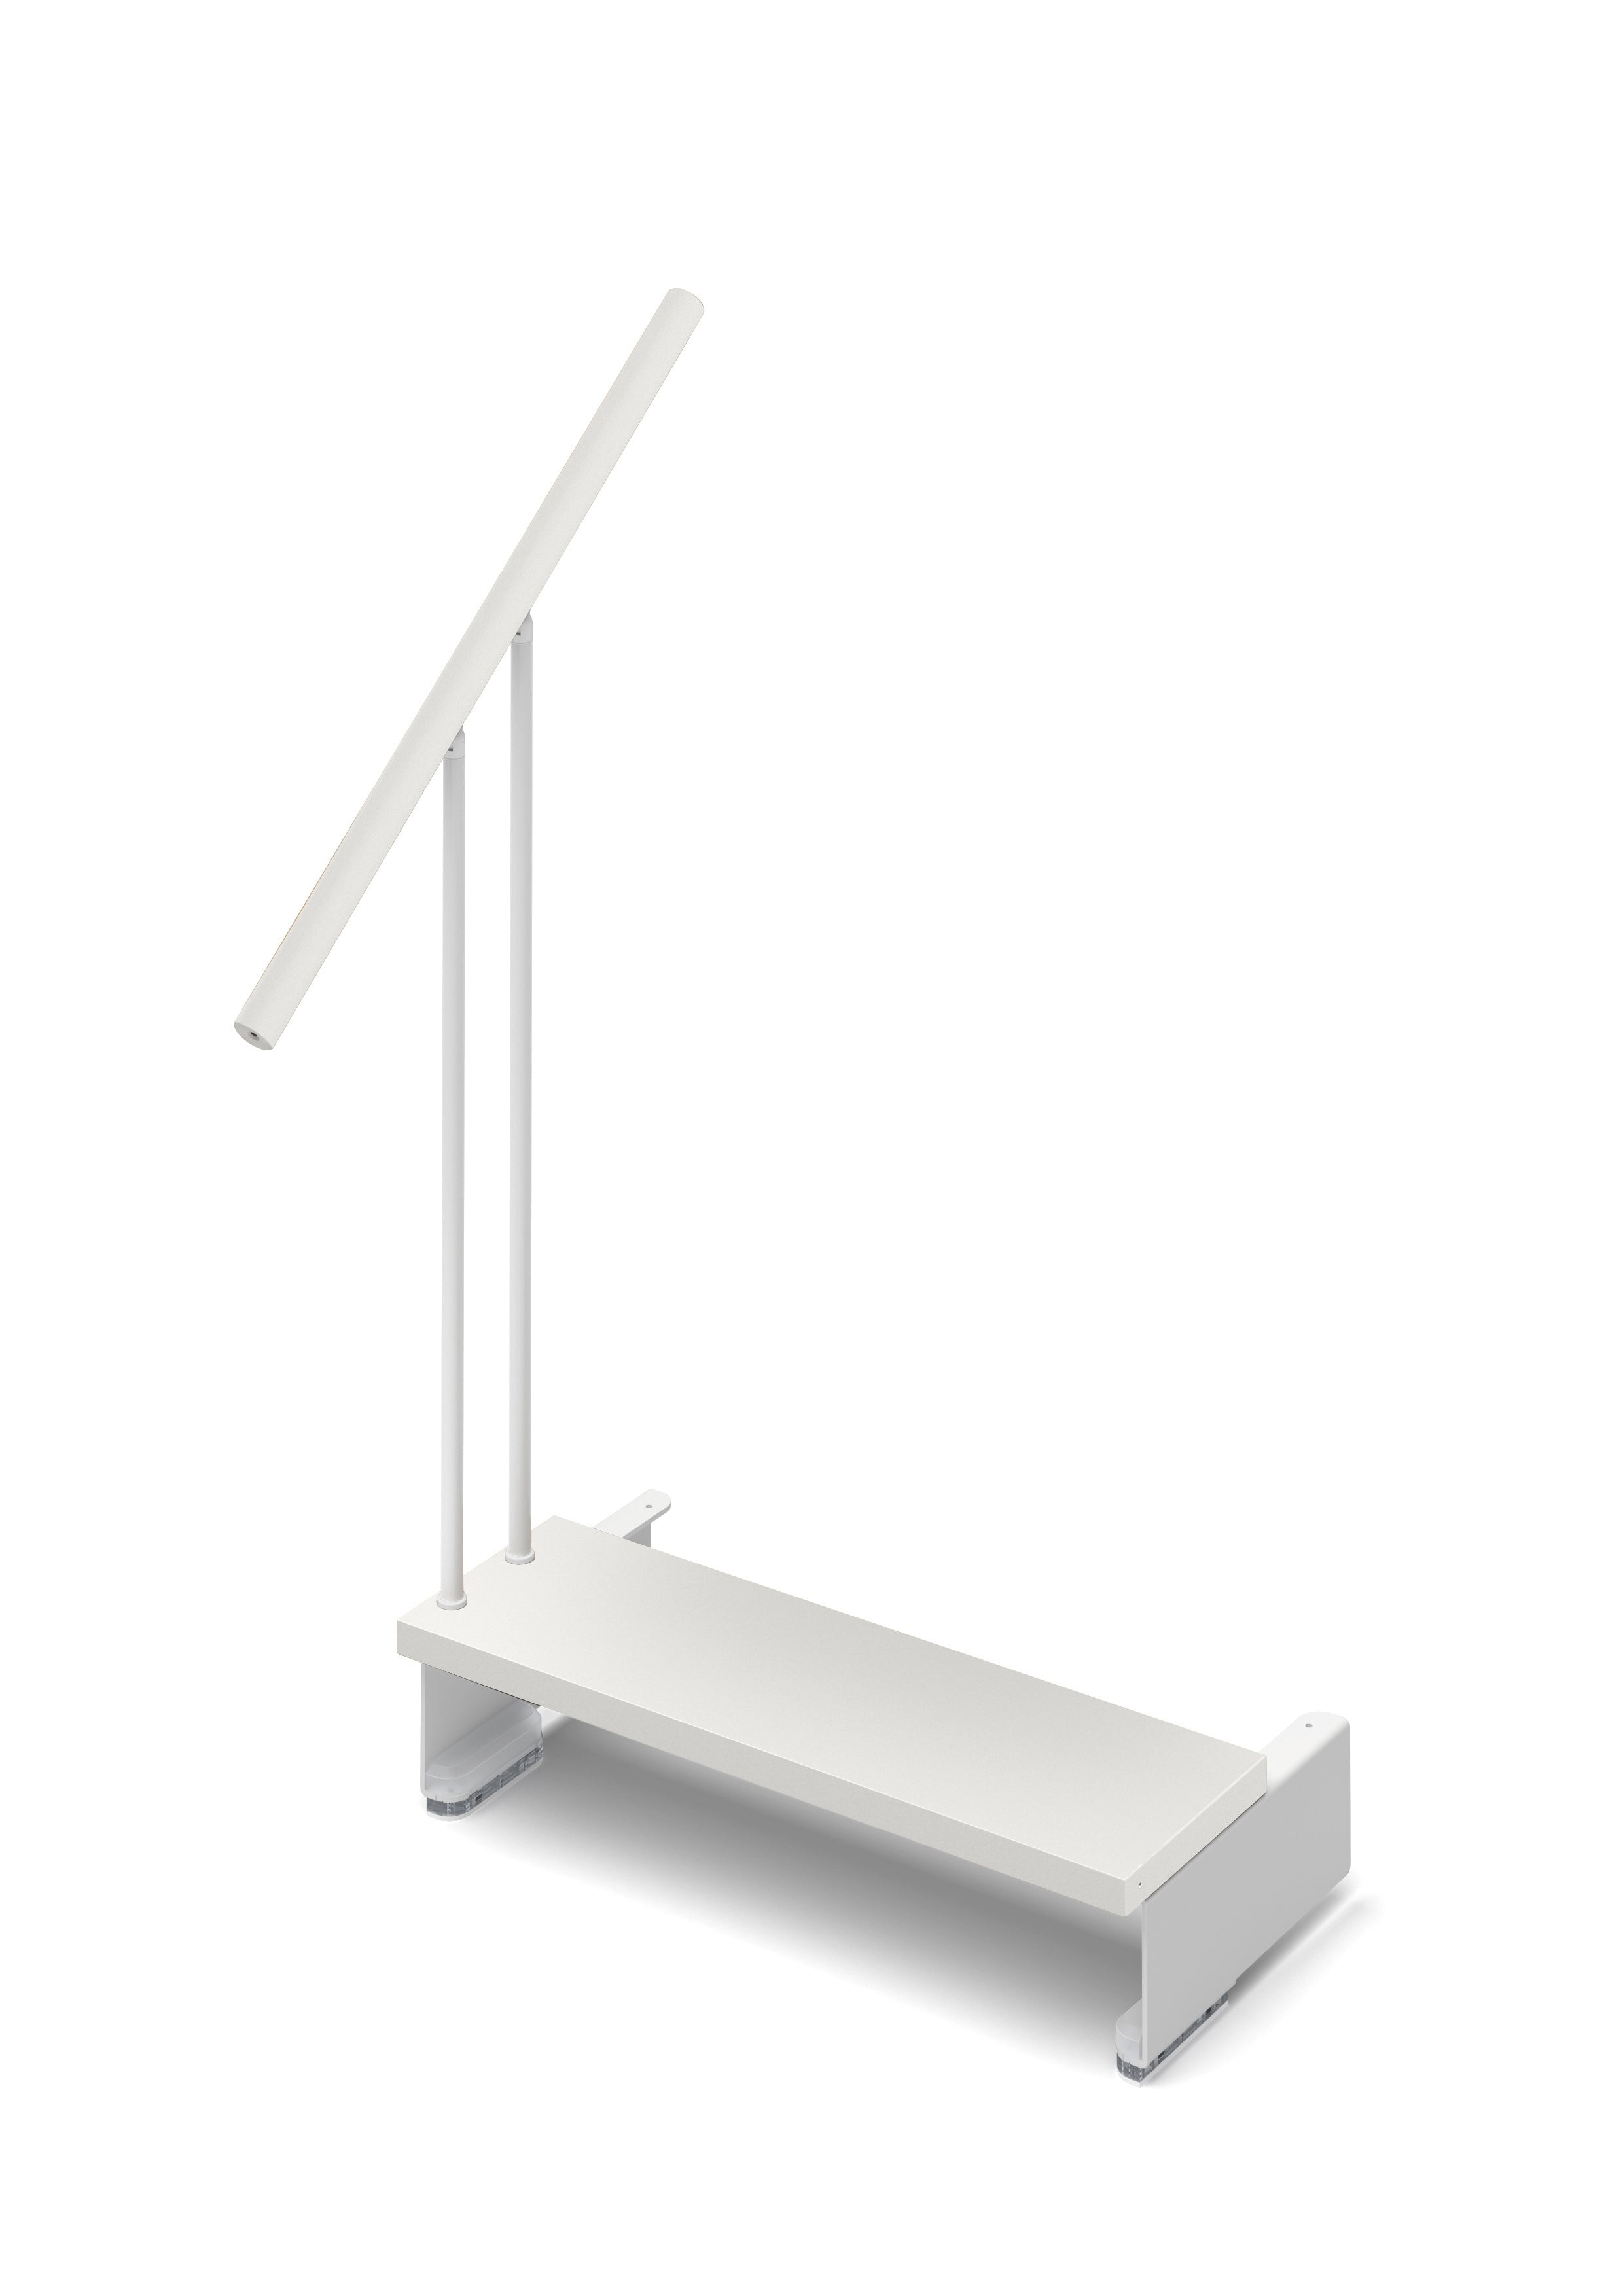 Additional step Adapta 74cm (with structure and railing) - Lacquered White 94